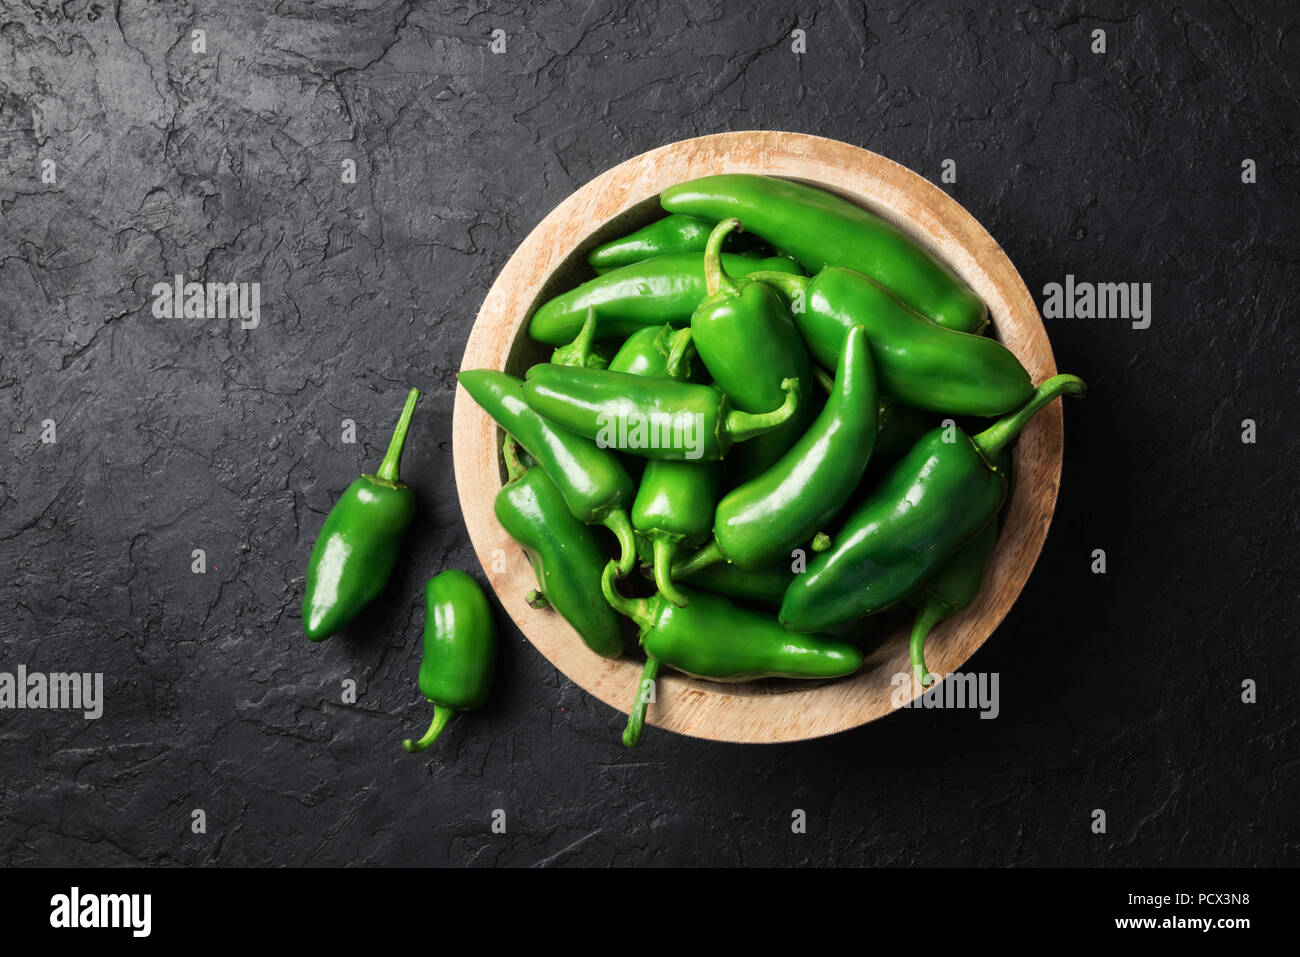 Green jalapeno hot pepper in wooden plate Stock Photo